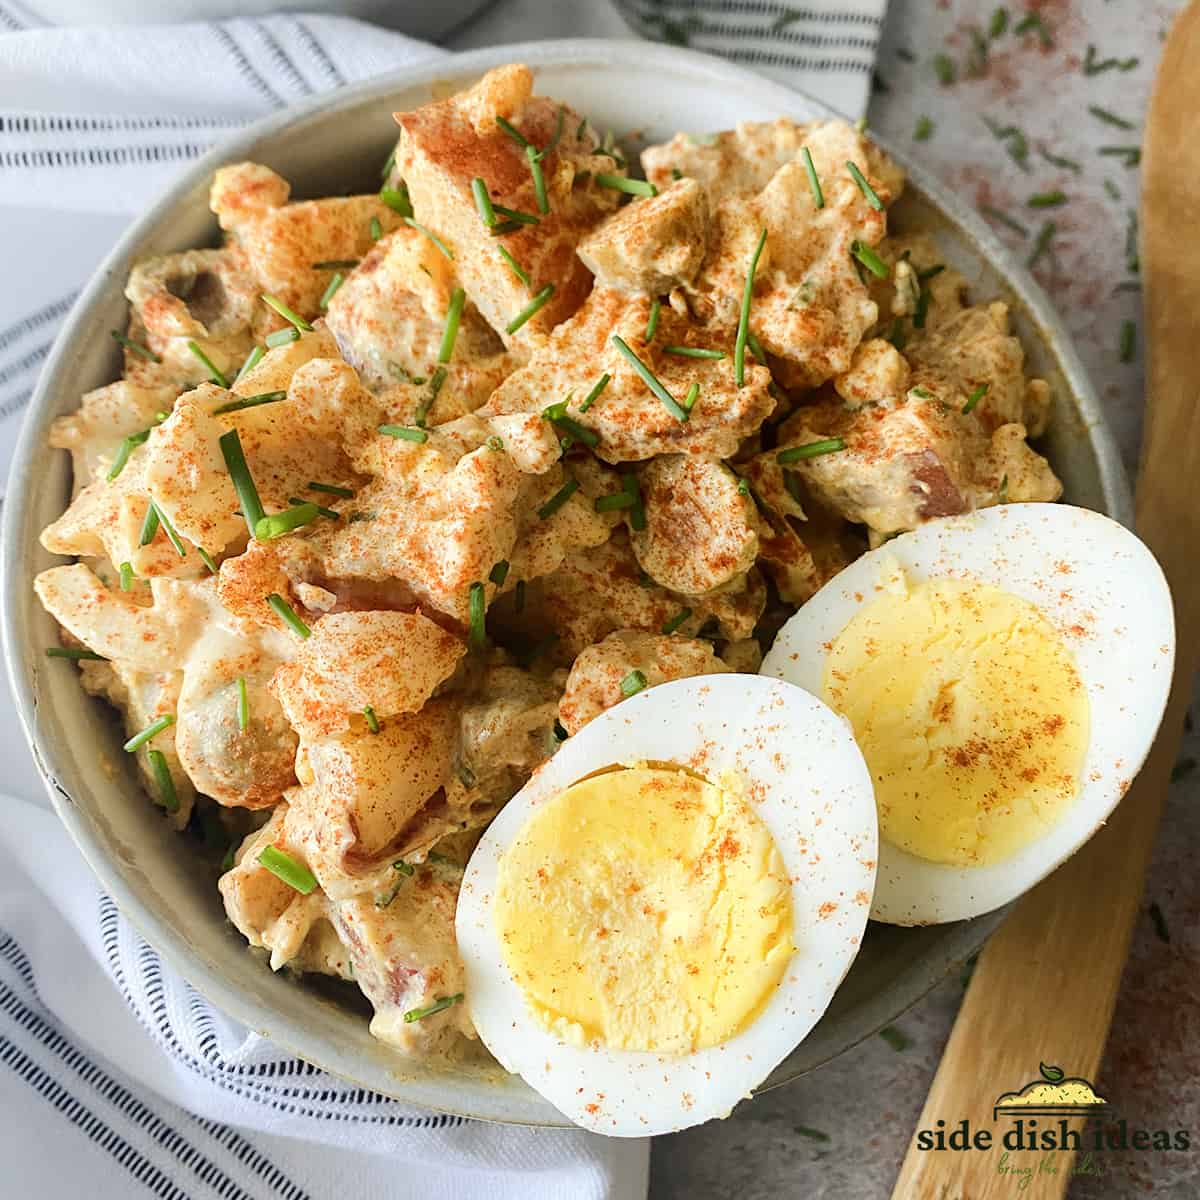 potato salad with mustard, paprika and chives in a bowl with hard boiled egg slices